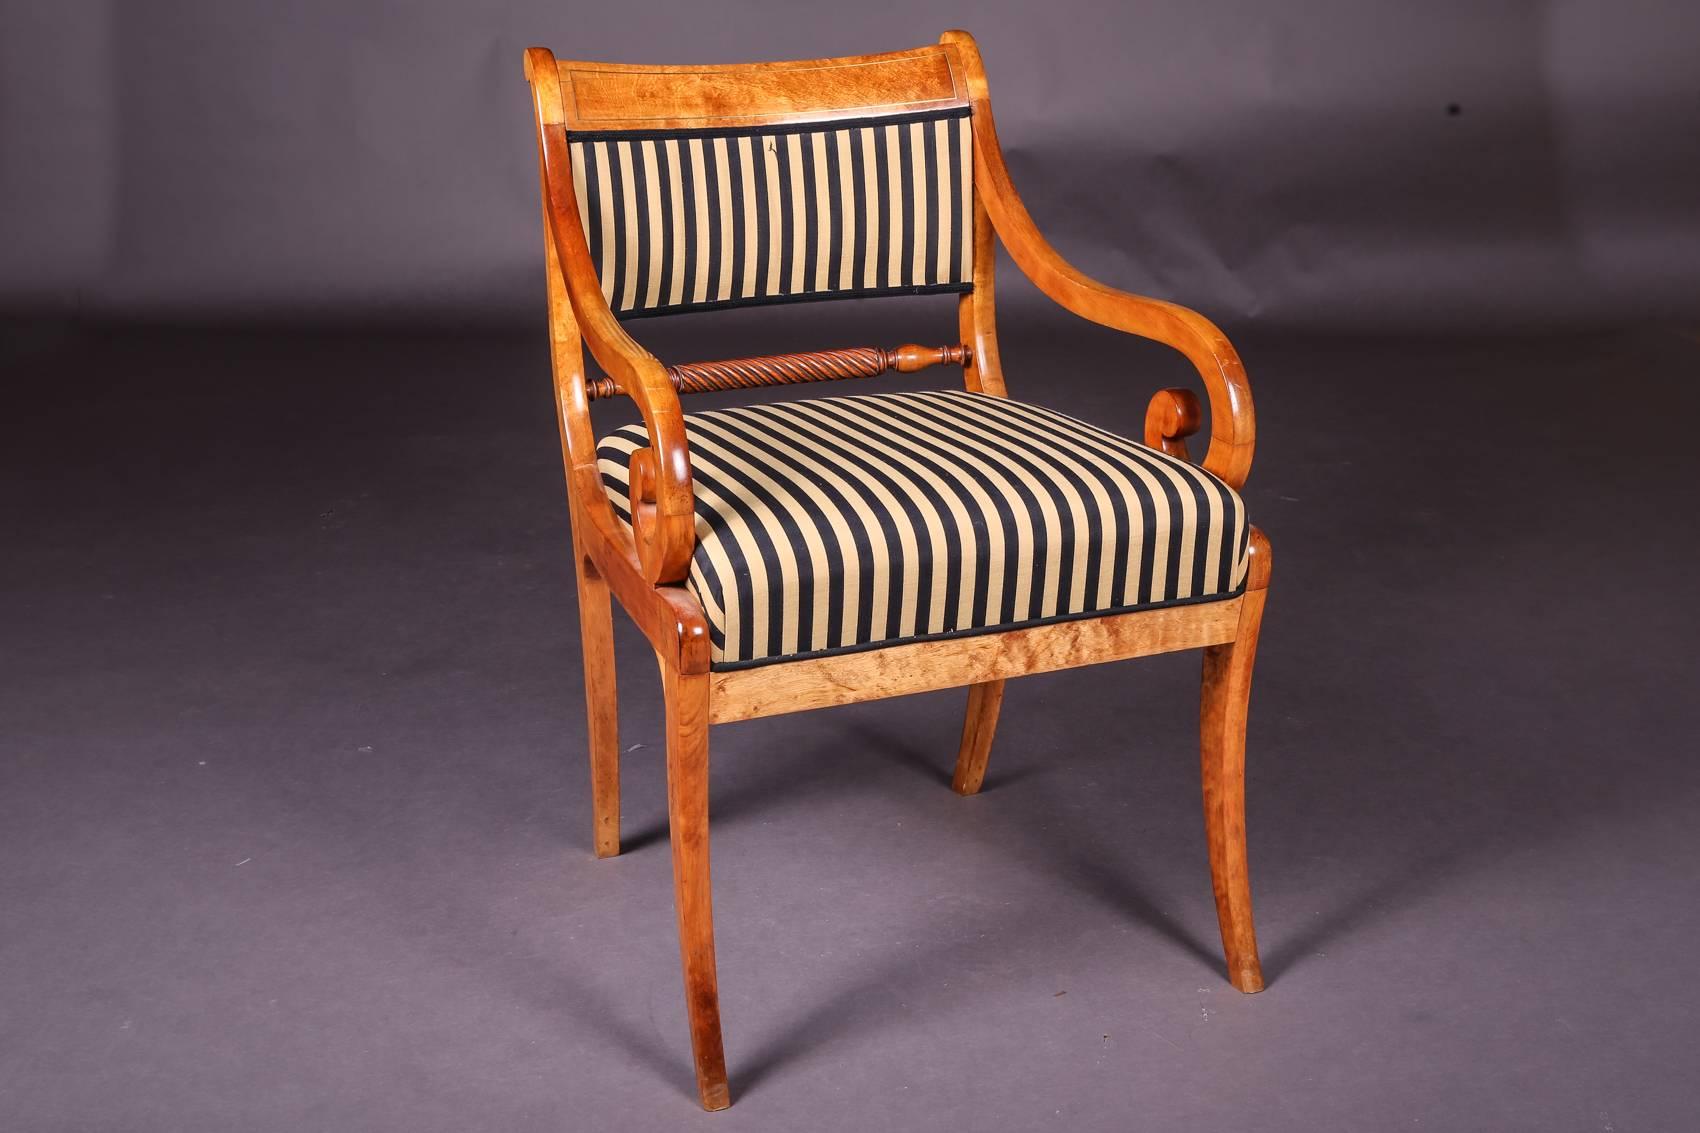 Solid birchwood. Trapezoidal frame on conical saber-shaped legs. Supports bracing supports for slightly rising armrests in rolled-up volute. High-arched curved backrest framing with wide end and a cord-shaped middle web. The armchair has been